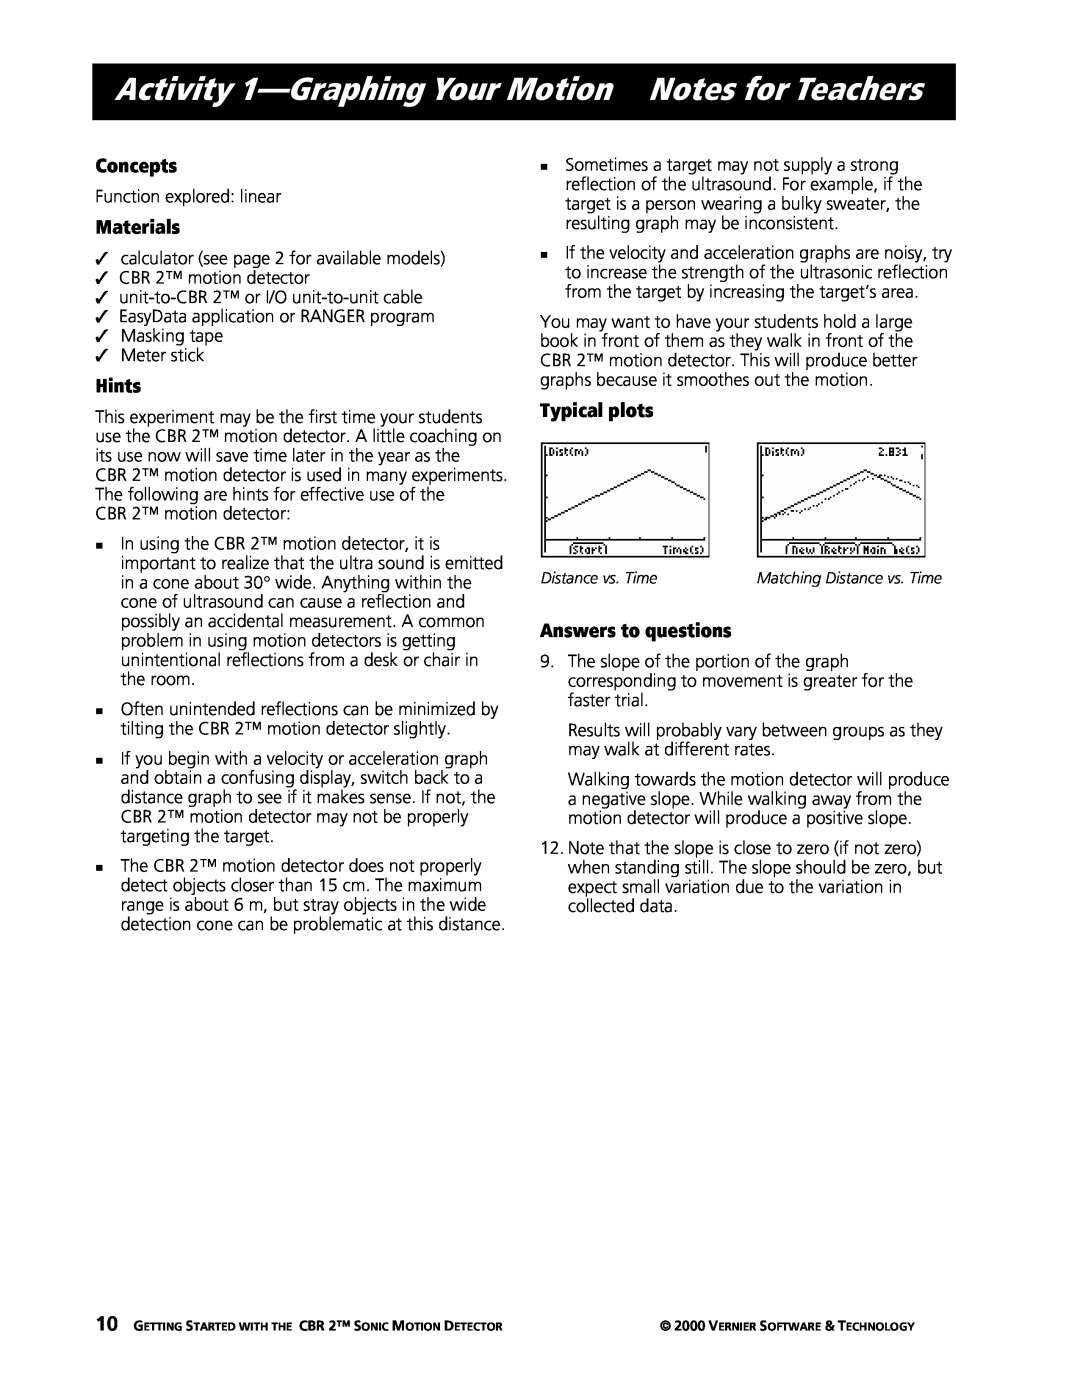 Texas Instruments CBR 2 manual Activity 1-GraphingYour Motion Notes for Teachers, Concepts, Materials, Hints, Typical plots 